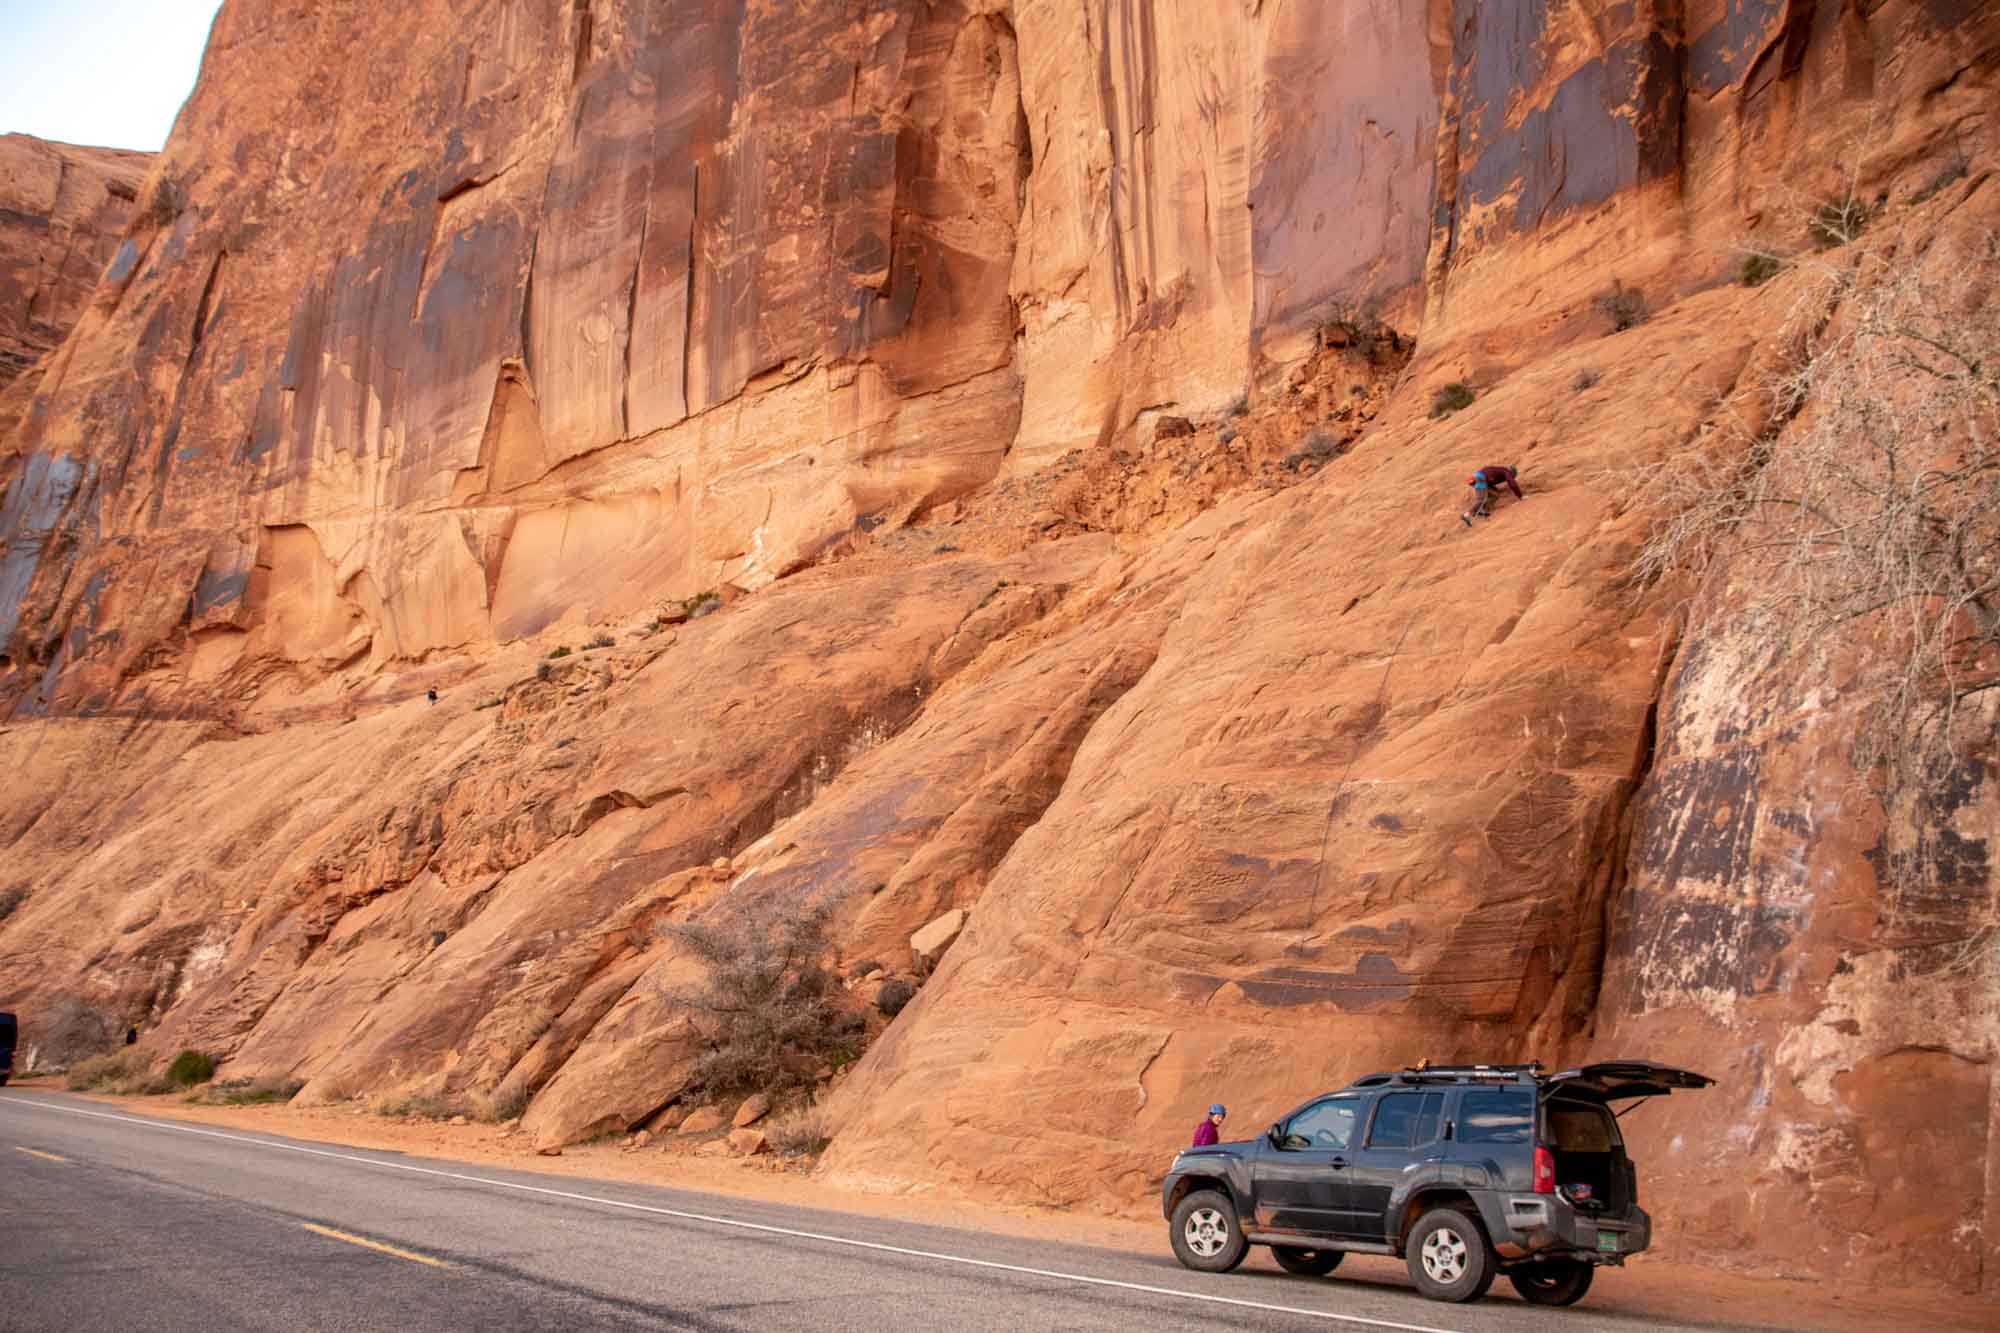 Rock climber ascending from car parked on Potash Road in Moab